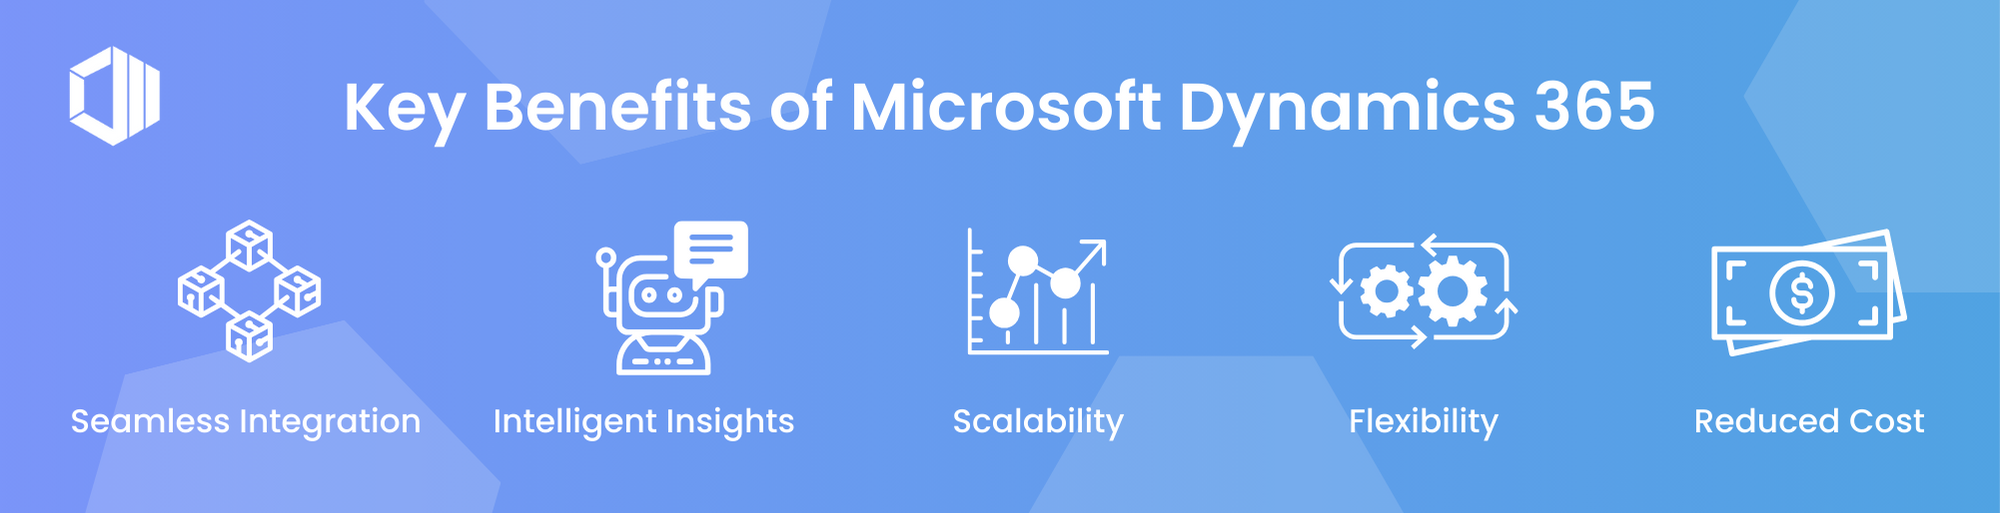 infographic - 7 benefits of Dynamics 365